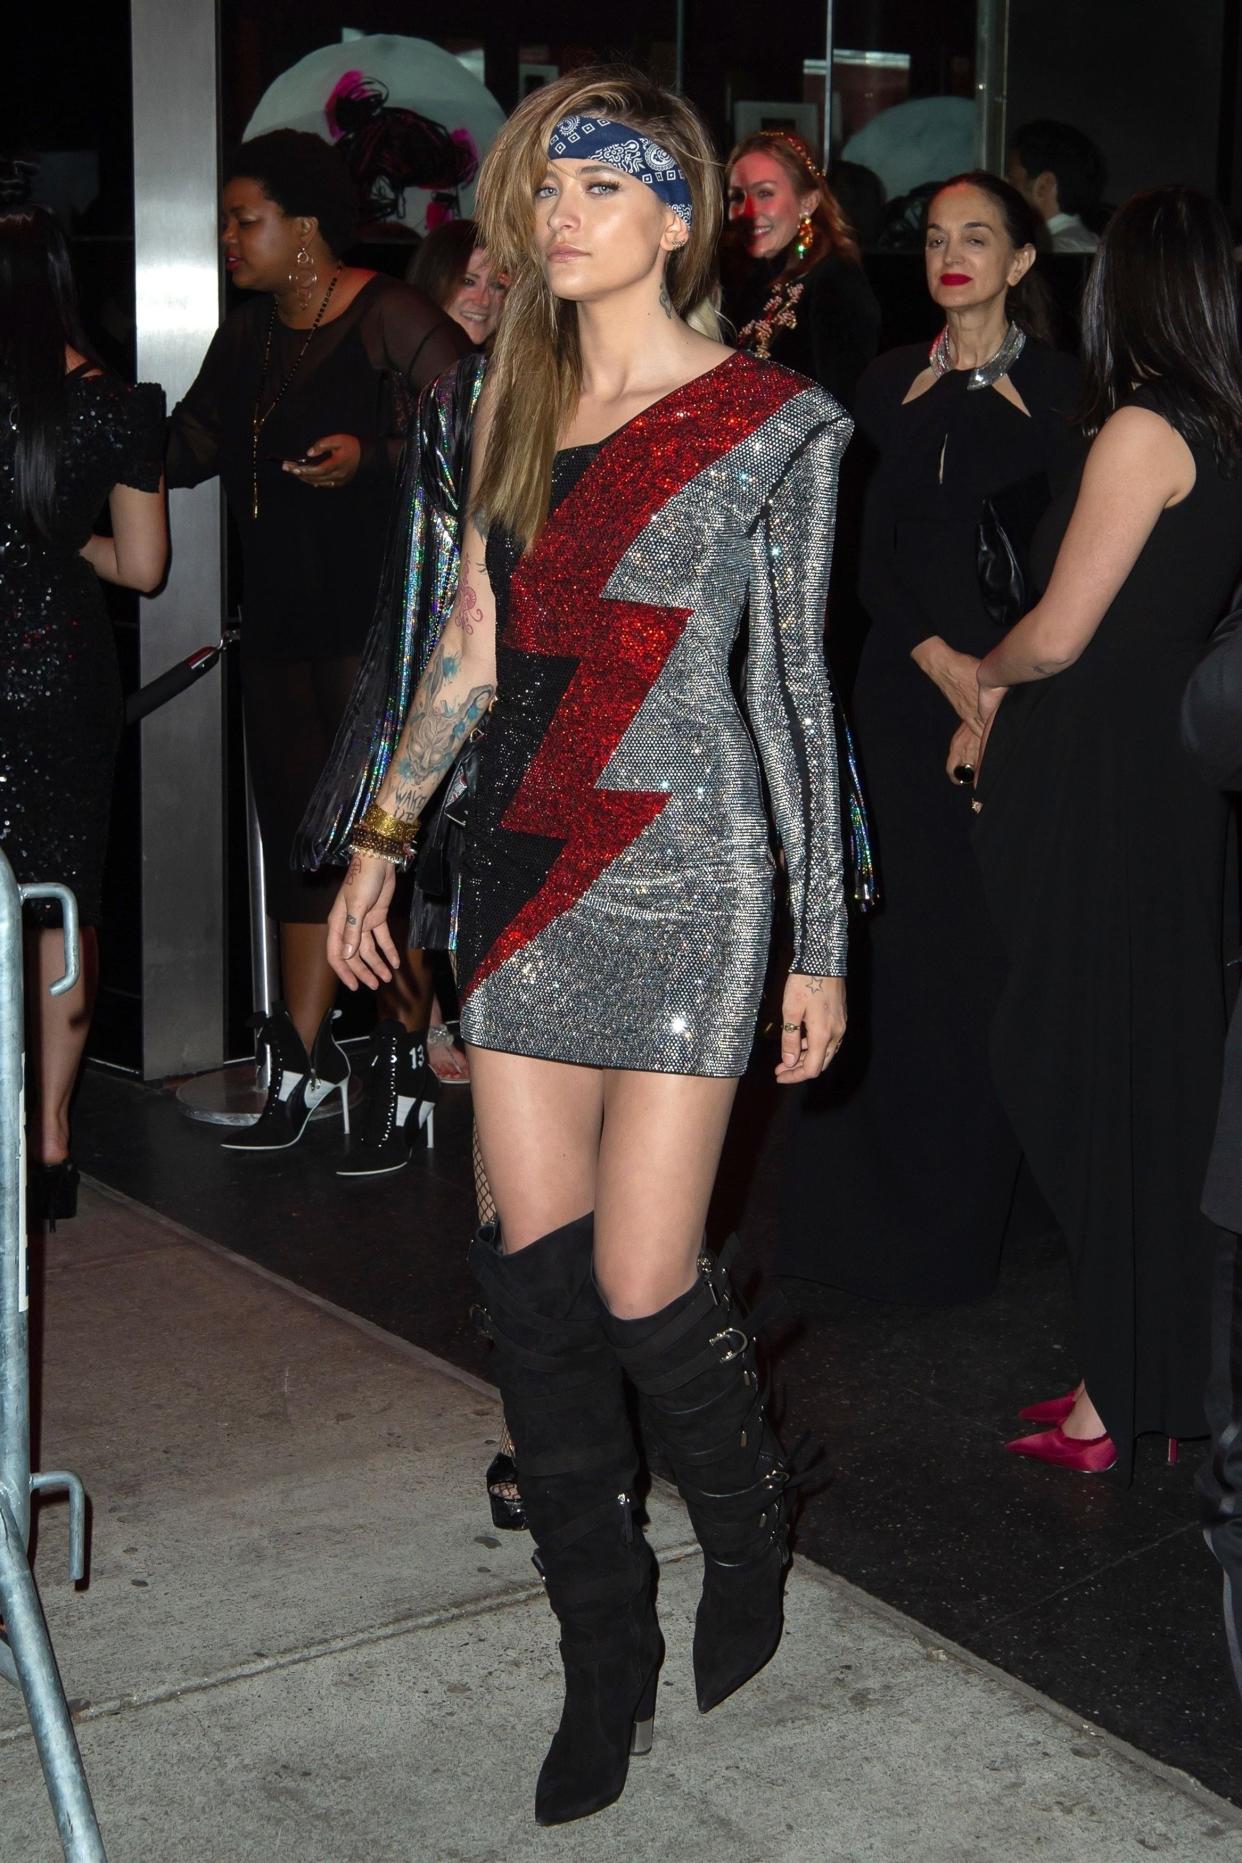 Paris Jackson looks amazing rocking a sequin lightning bolt dress as she leaves the Standard Hotel MET Gala afterparty in New York City. (Photo: Splash News)